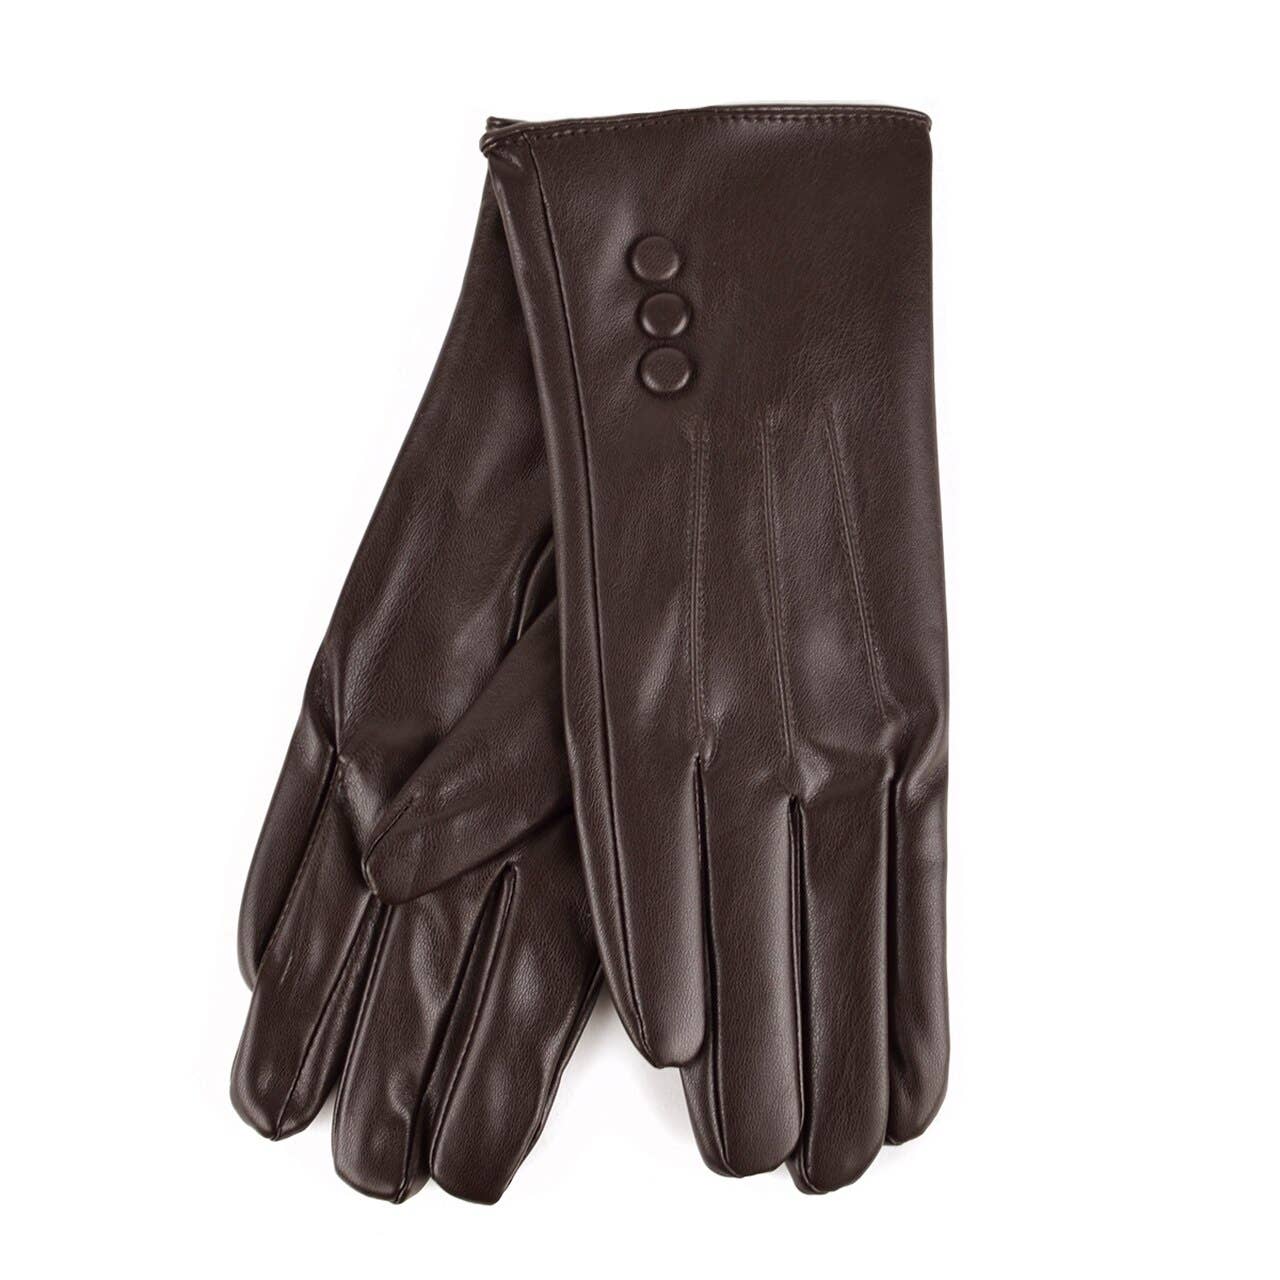 Women's PU Leather Winter Touch Screen Gloves: Black / L/XL